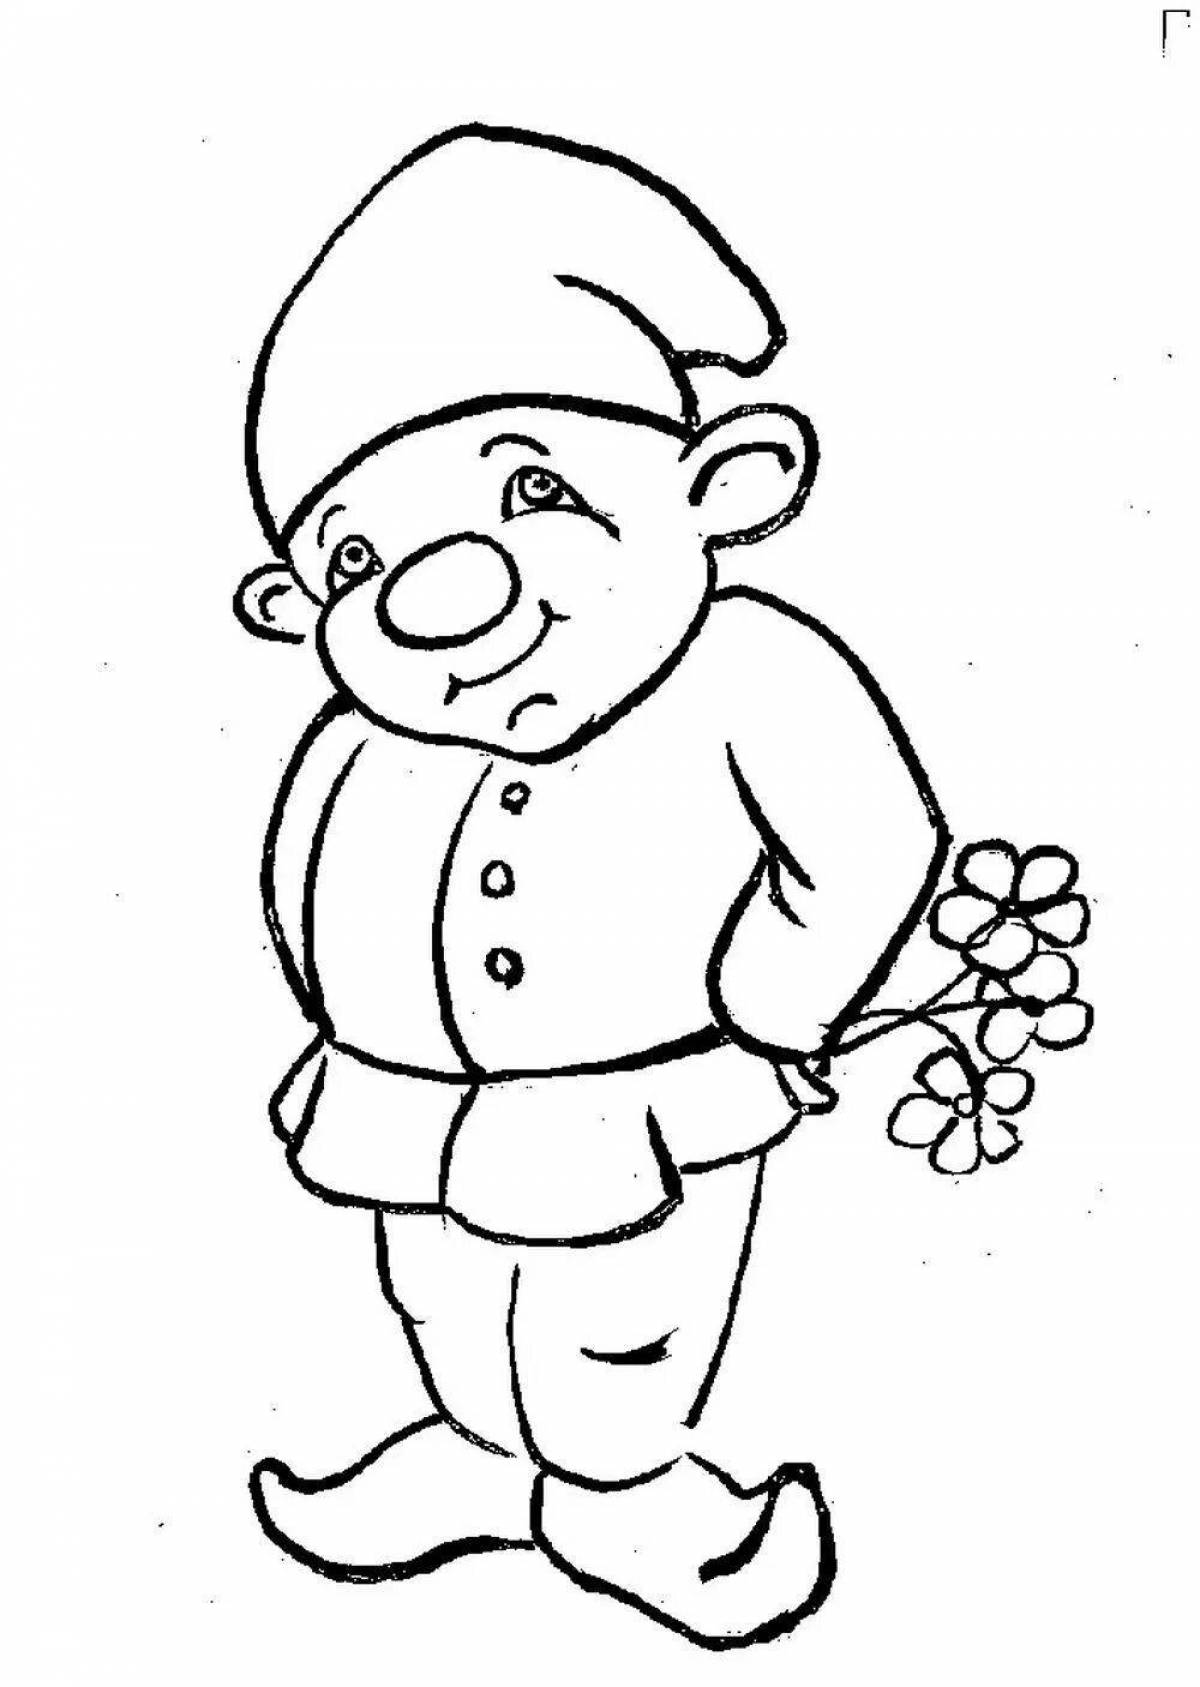 Crazy gnome coloring pages for 3-4 year olds